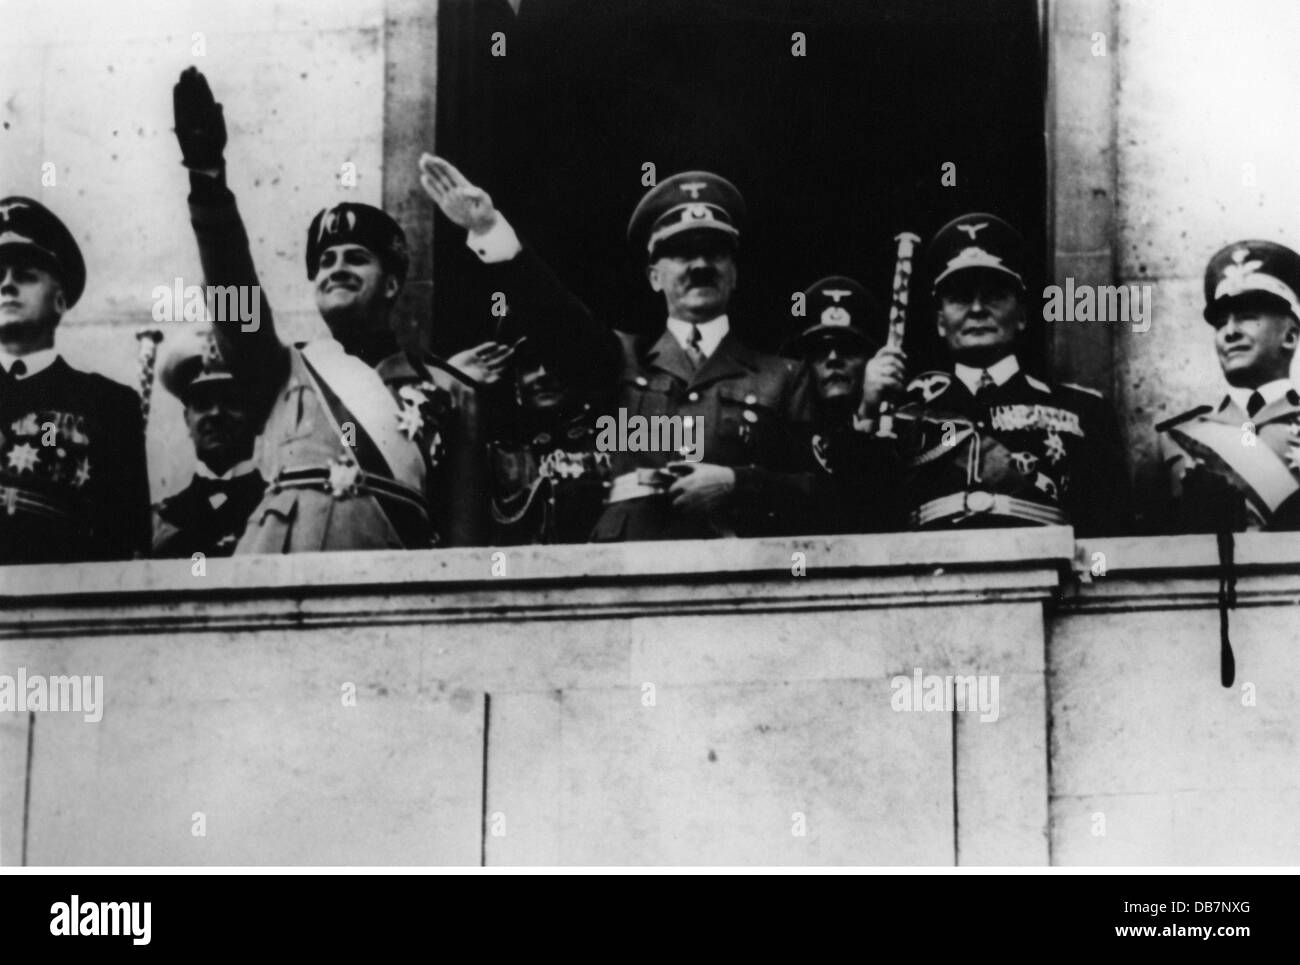 Nazism / National Socialism,politics,treaty,signing of the Stahlpakt(Pakt of Steel)with Italy,22.5.1939,Hermann Goering,Chancellor of the Reich Adolf Hitler,Foreign Minister of Italy Galeazzo Ciano,Foreign Minister of the Reich Joachim von Ribbentrop,balcony of the Chancellery of the Reich,Berlin,foreign policy,external policy,diplomacy,axis Rome-Berlin,Axis Powers,fascism,alliance,treaties,alliance treaty,Fuehrer,dictator,dictators,President of the Reich 1934 - 1945,Germany,German Reich,Third Reich,1930s,30s,20th century,histori,Additional-Rights-Clearences-Not Available Stock Photo